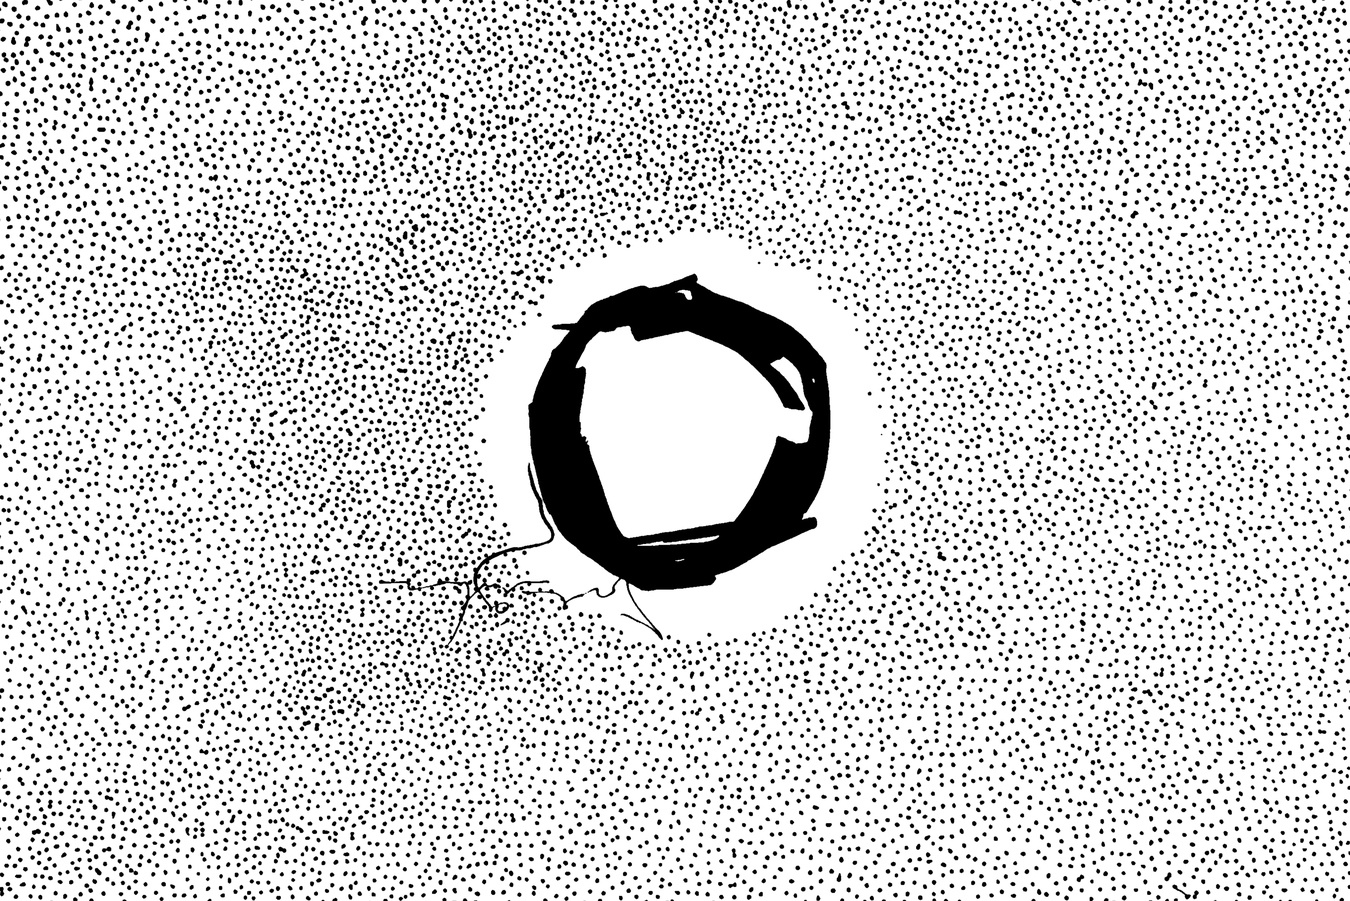 Clara Wells, Noise Through Spaces (still), hand drawn animation, 2018. Image courtesy of the artist.